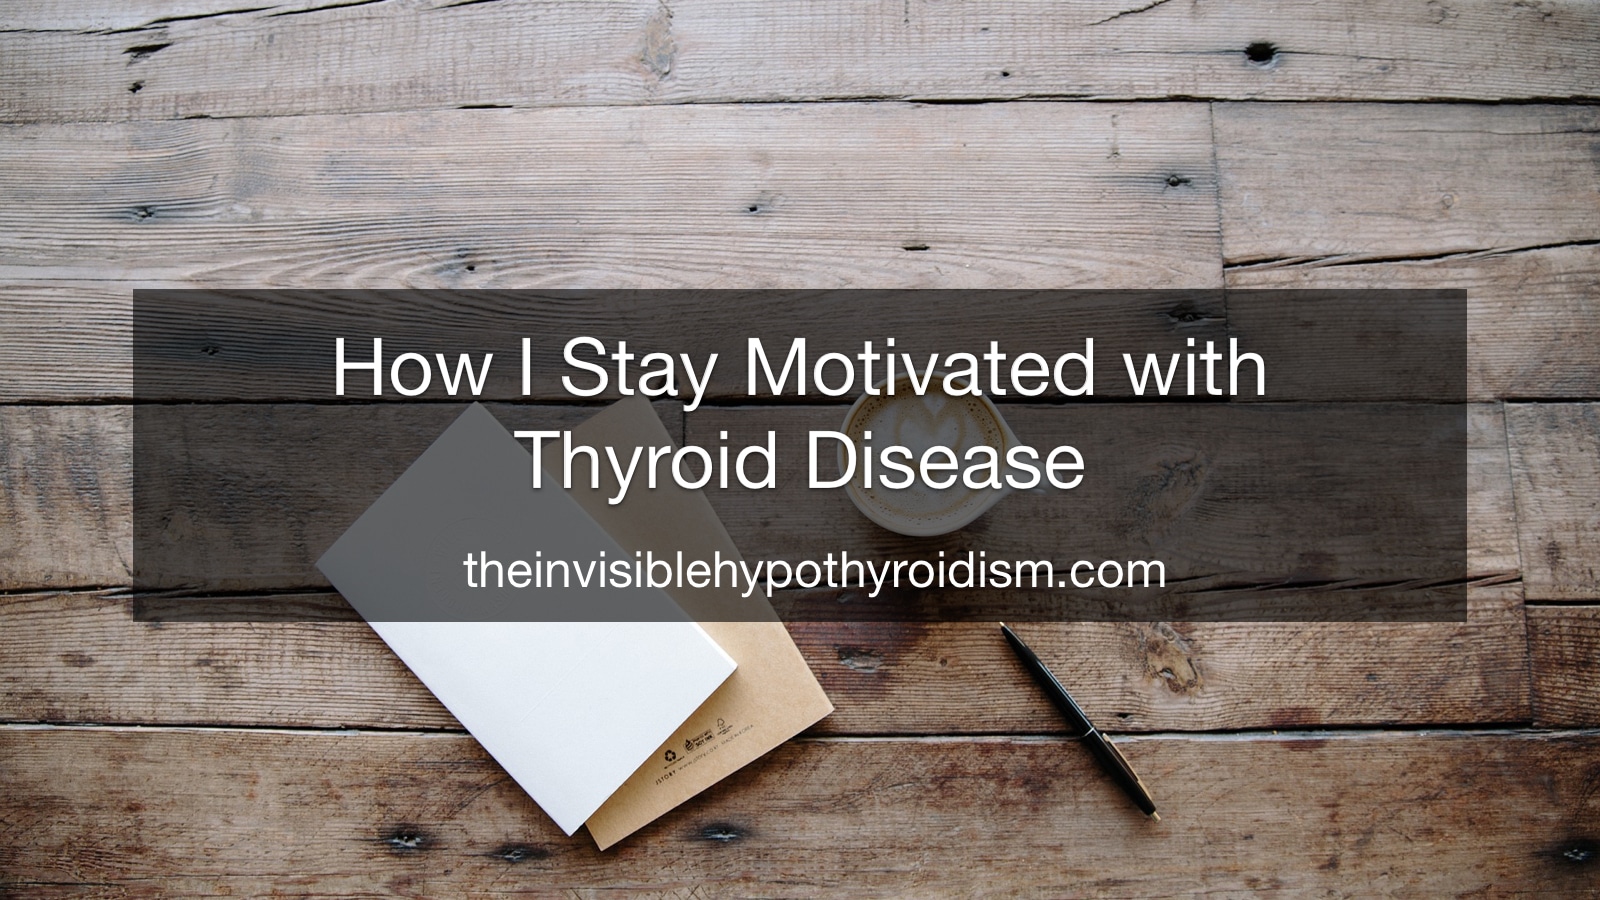 How I Stay Motivated with Thyroid Disease